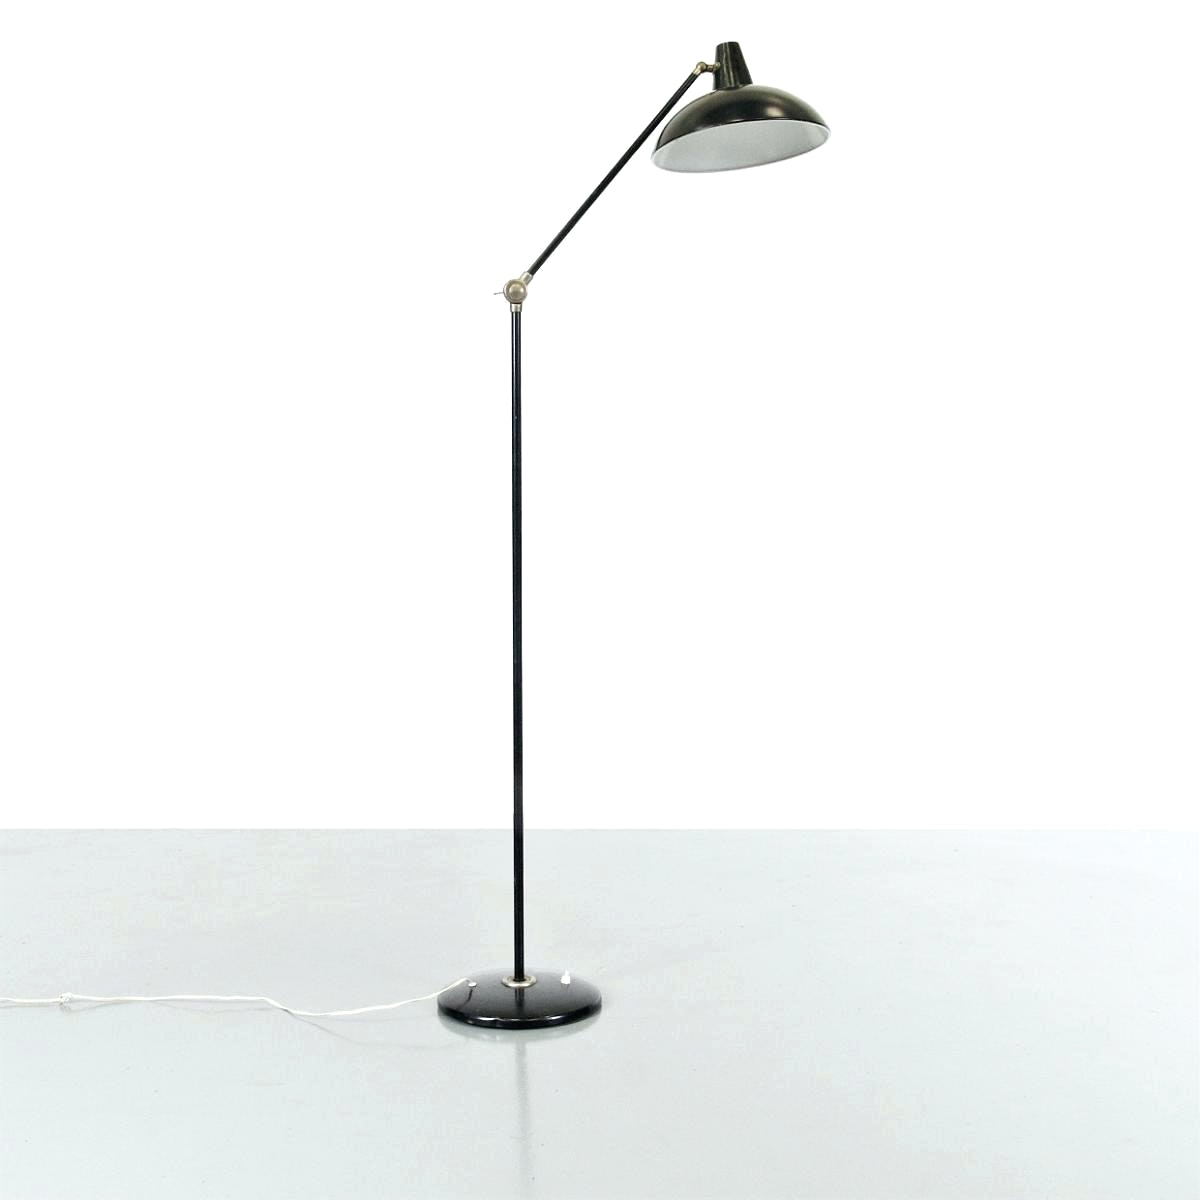 Awesome Simpson 4 Light Floor Lamp And Design Classic throughout measurements 1200 X 1200